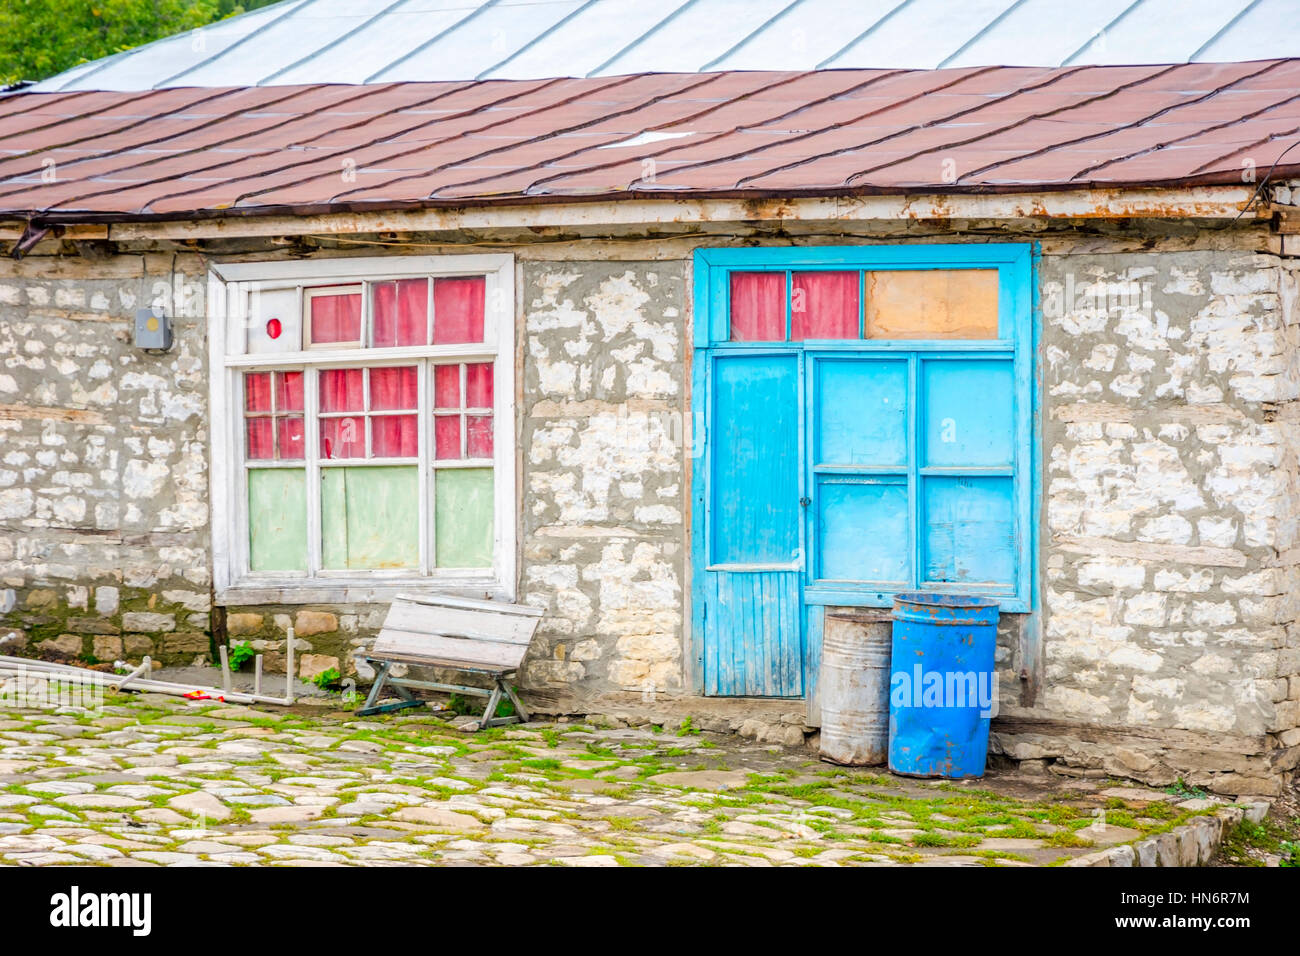 Old house made of stone with colorful windows, Lahich village, Azerbaijan Stock Photo